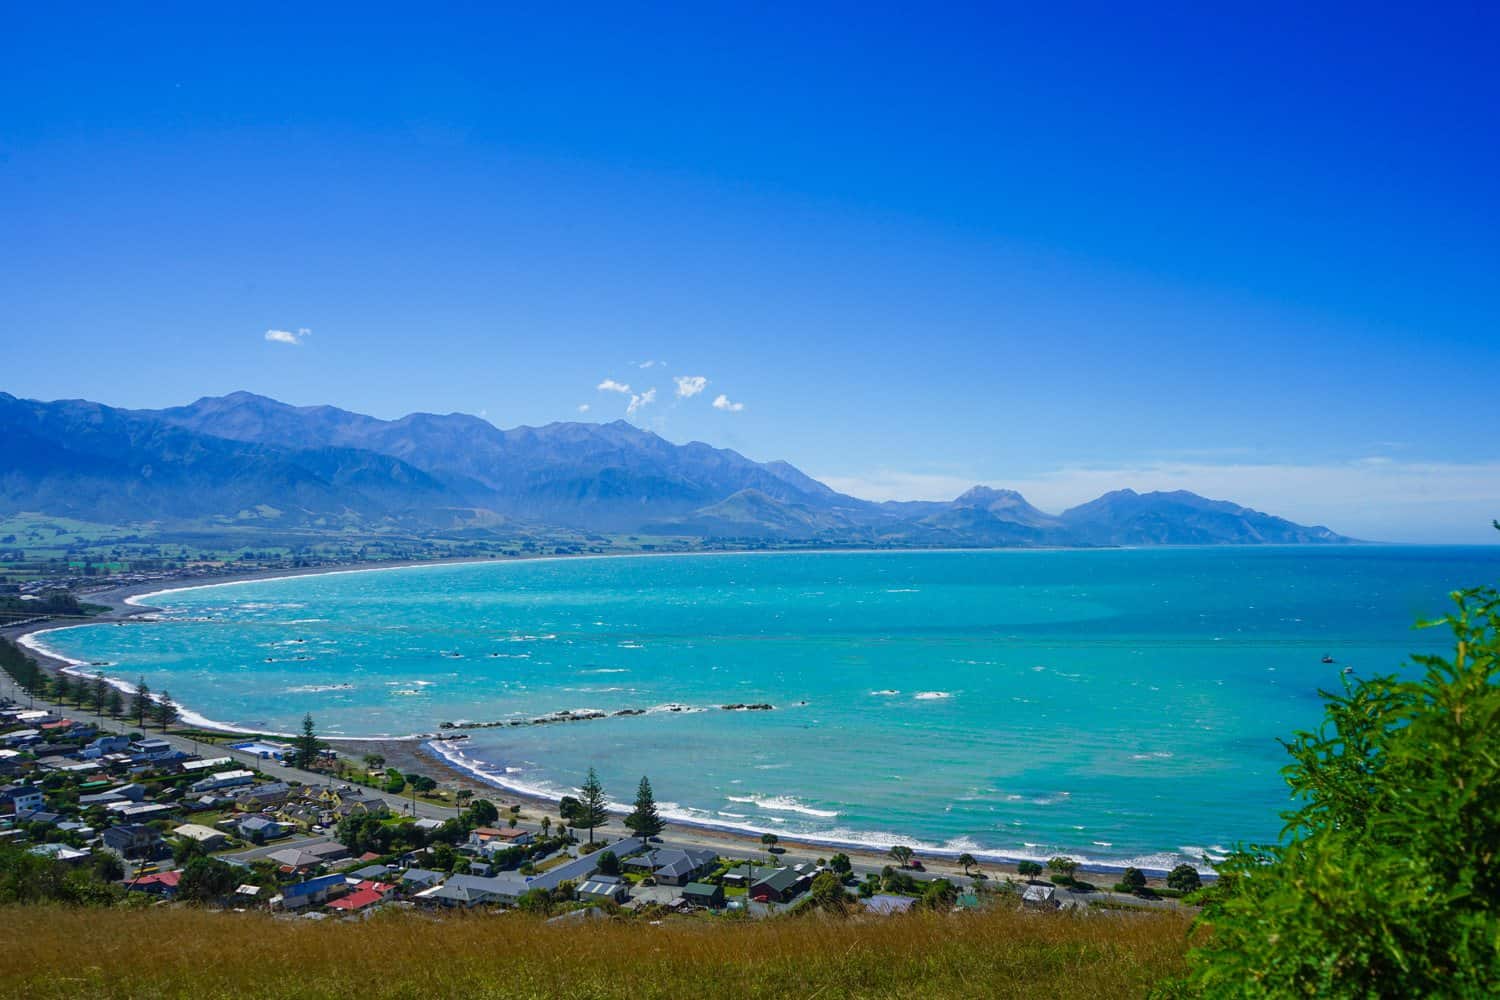 Kaikoura from above